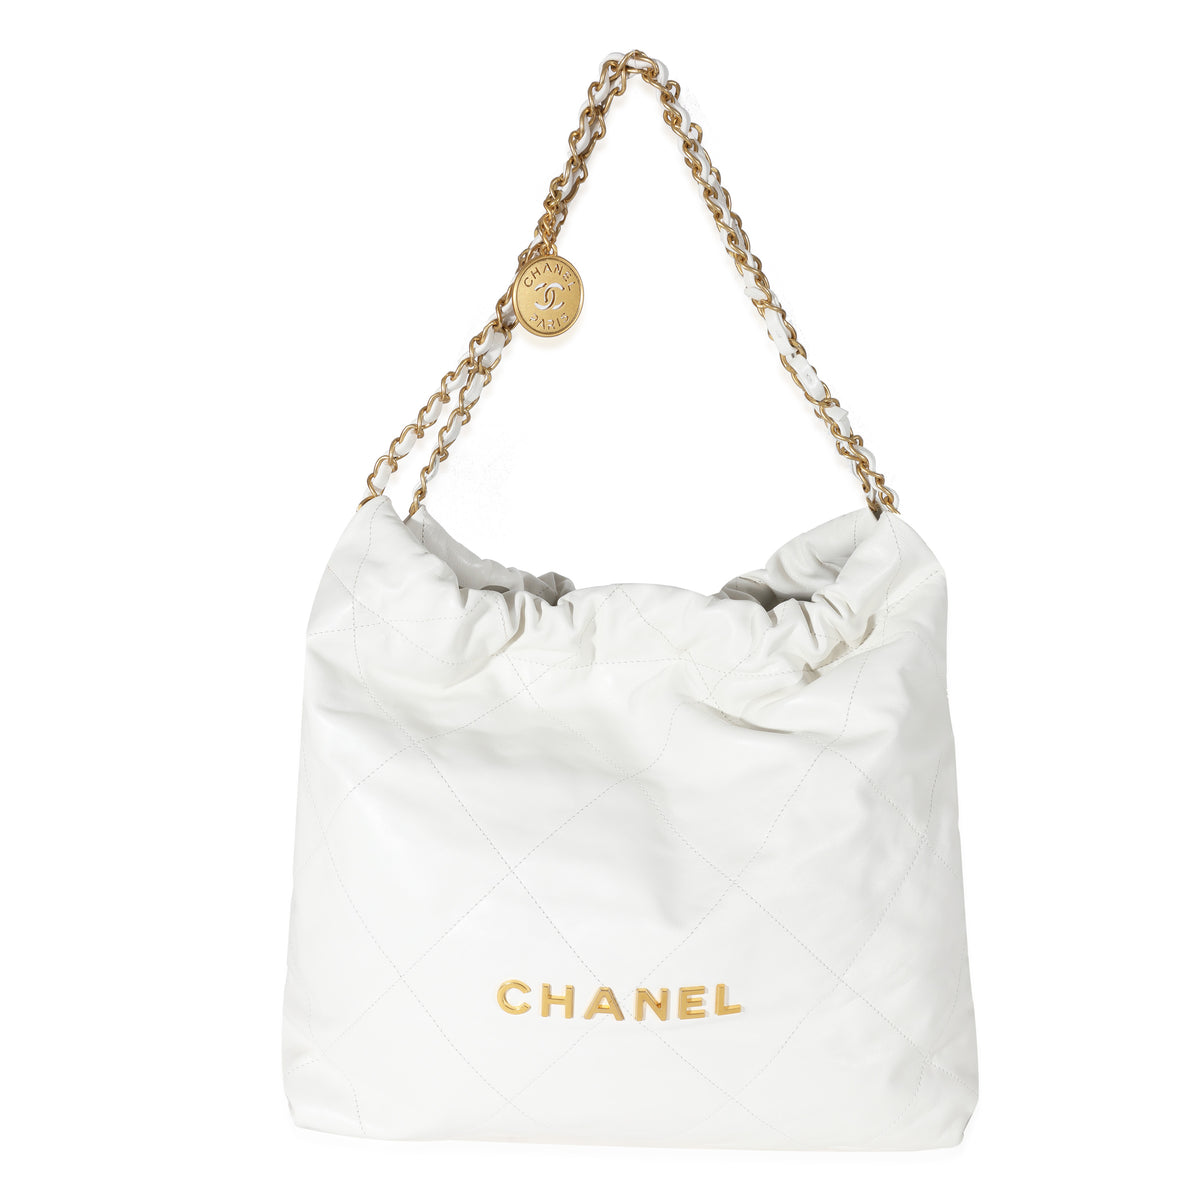 Snag the Latest CHANEL CHANEL Classic Flap Bags & Handbags for